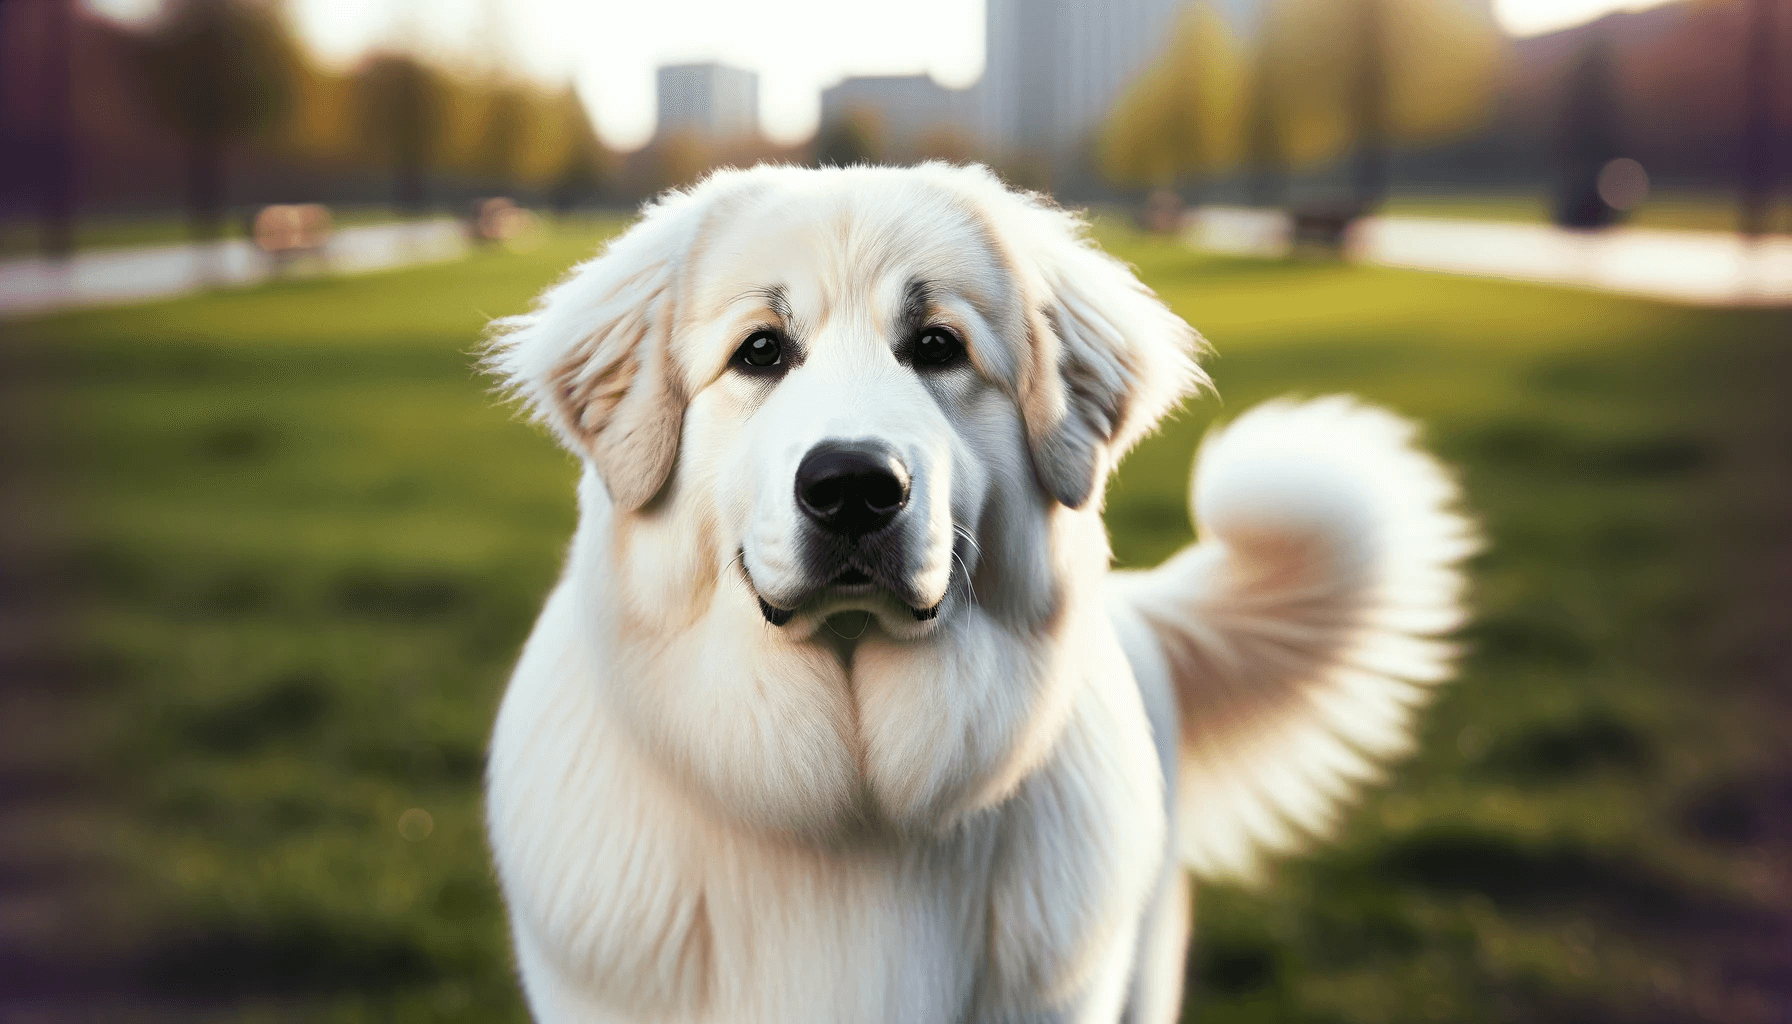 A gentle and friendly Pyrenees Lab Mix dog stands in a park setting with a soft expression, medium-length creamy white fur, and a sturdy build. Its e